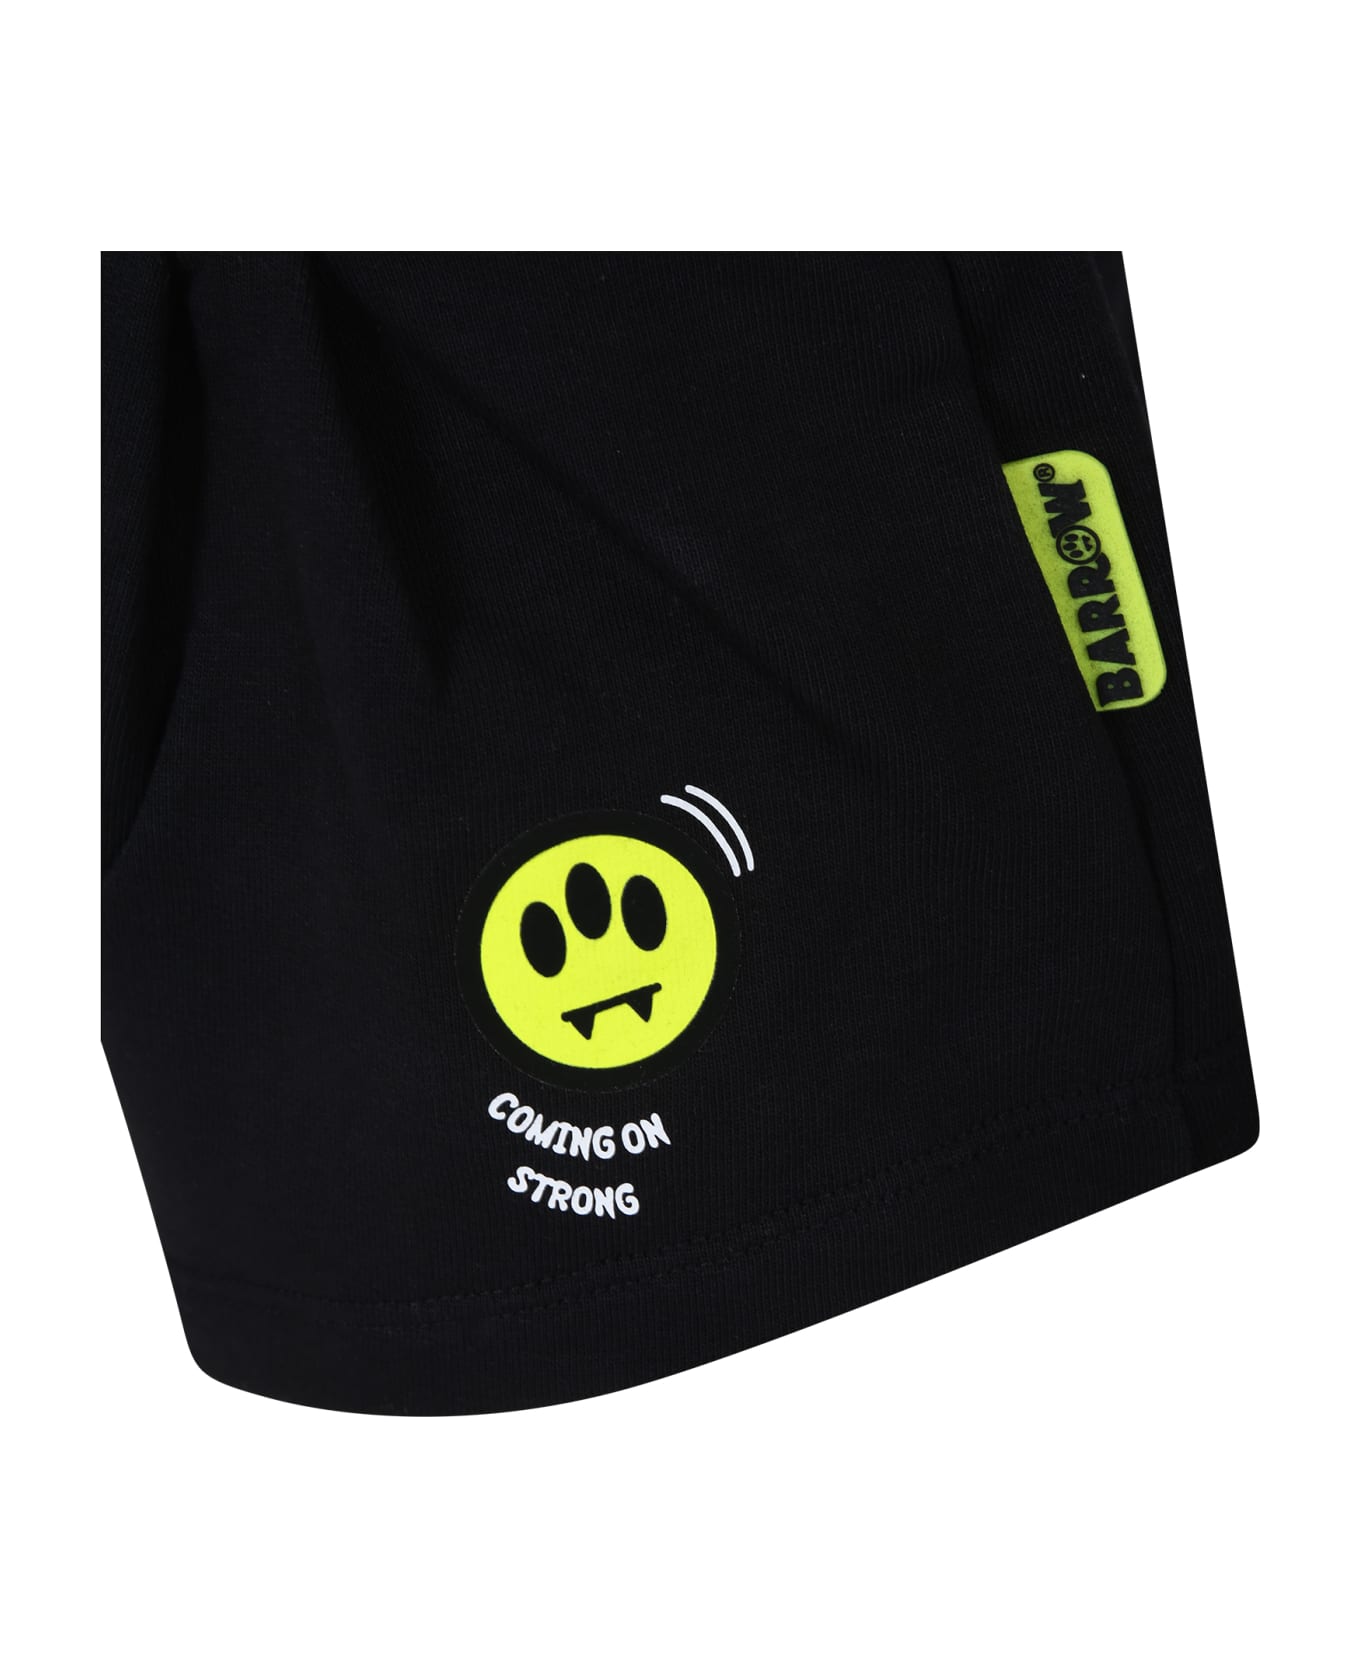 Barrow Black Shorts For Girl With Smiley Faces - Nero